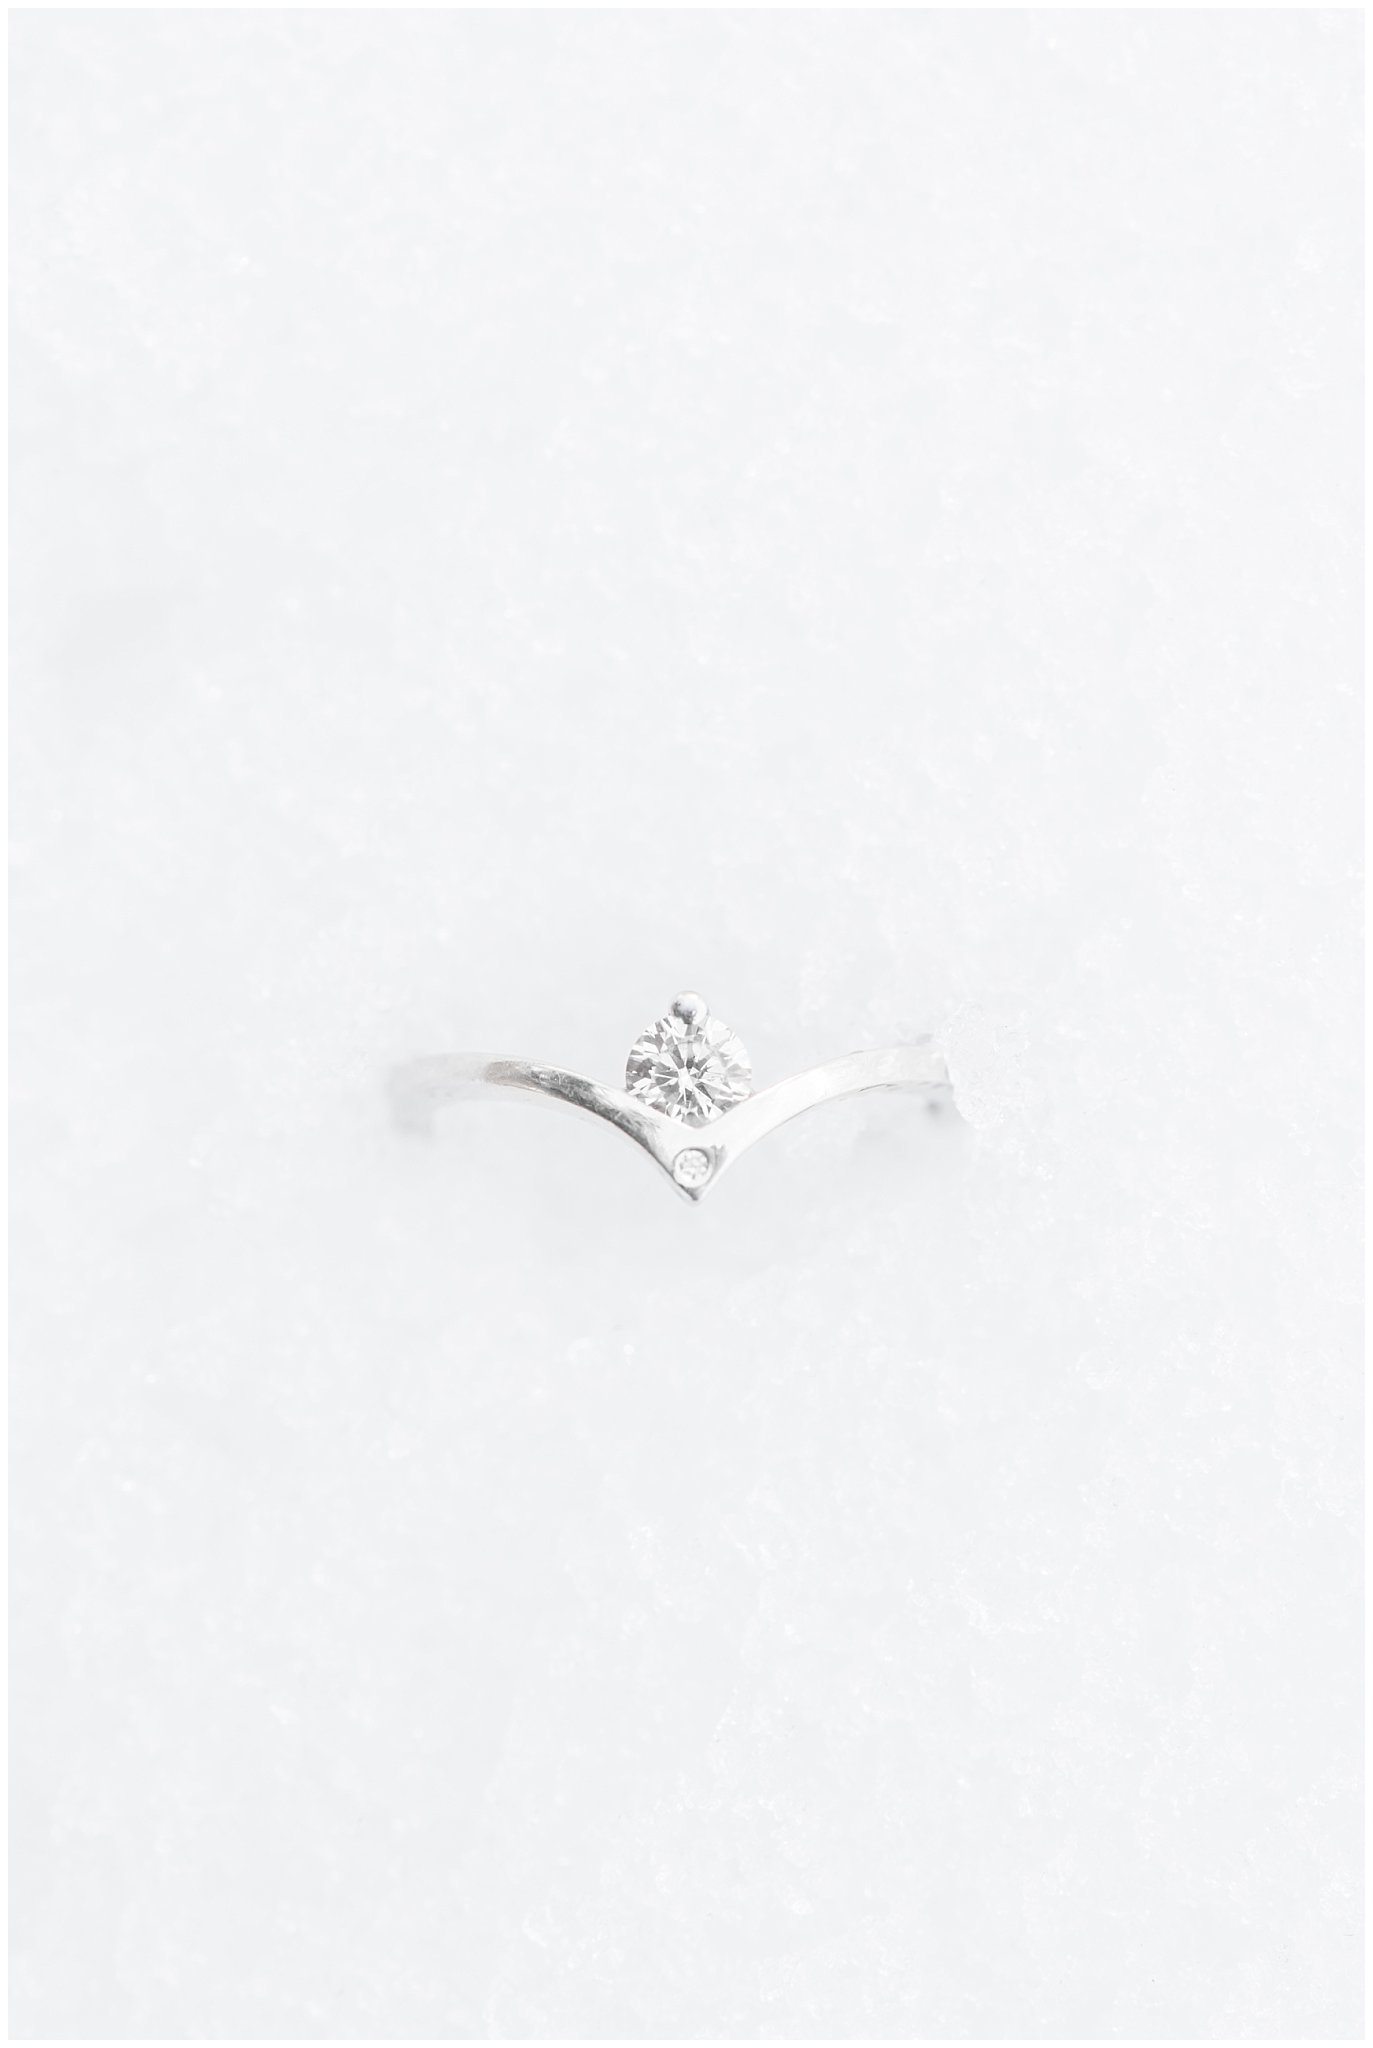 Custom engagement ring in the snow | Snowbasin Winter Engagement Session